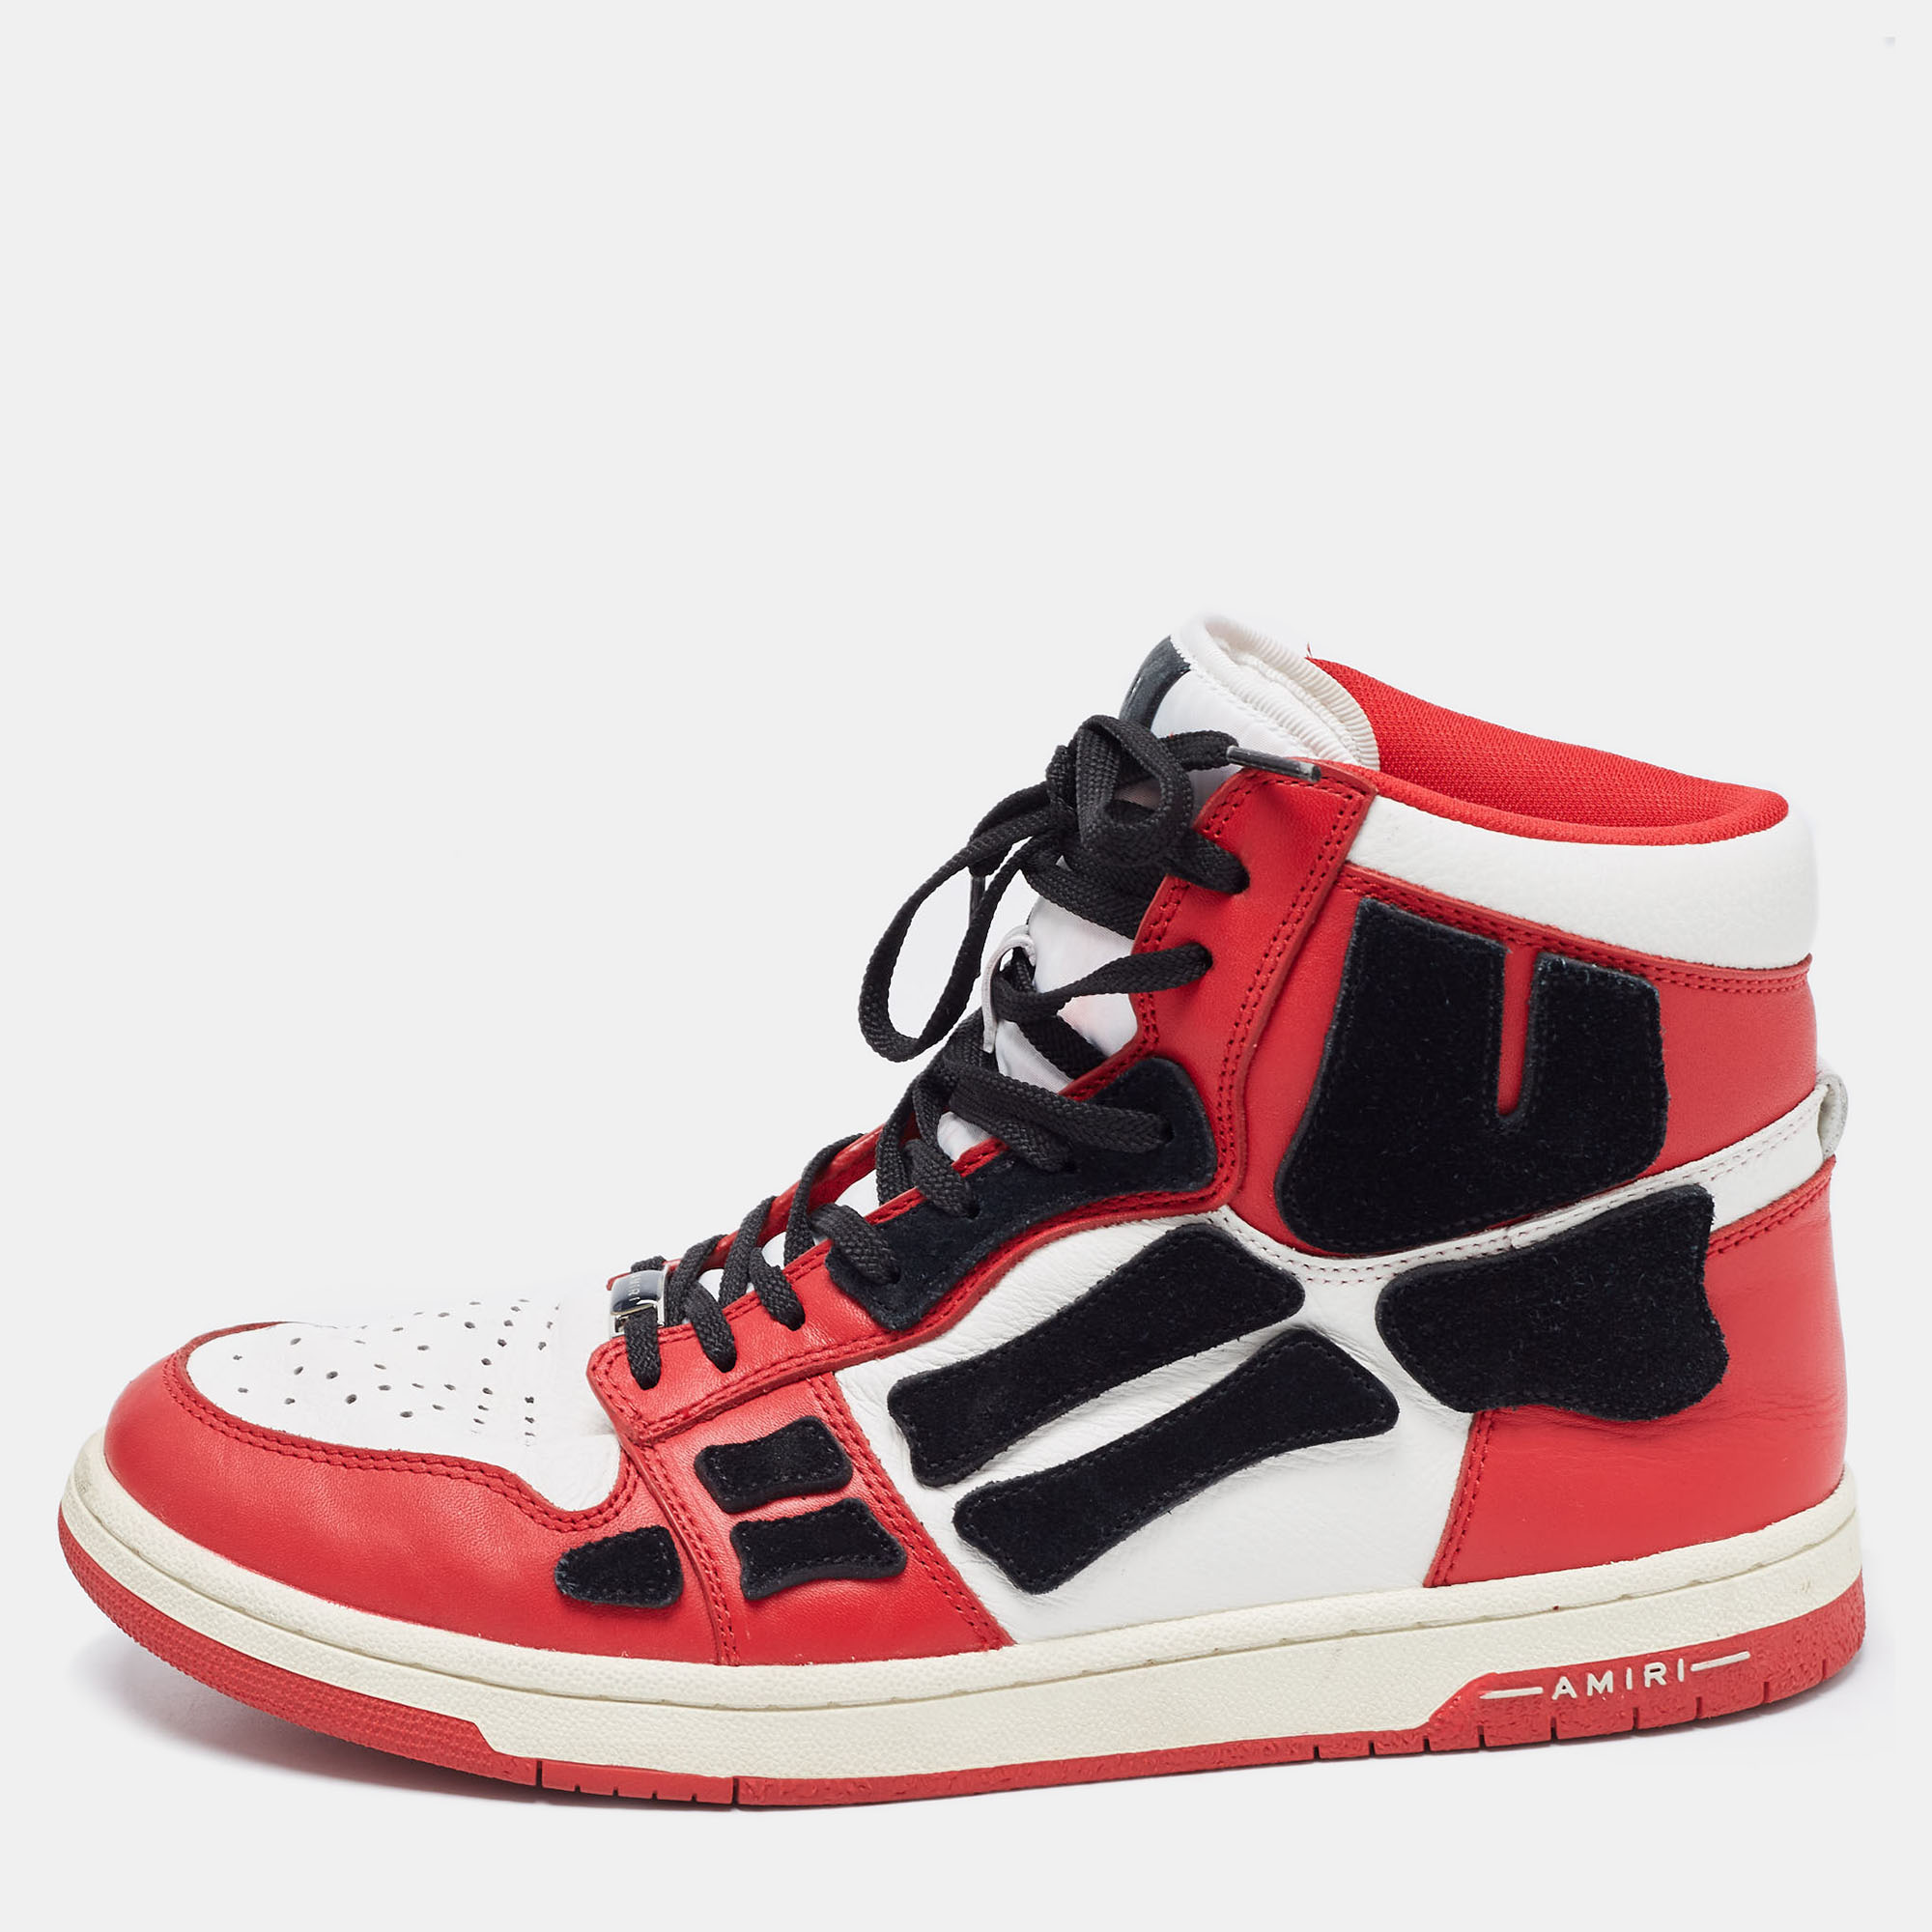 

Amiri Red/White Leather Skel High Top Sneakers Size